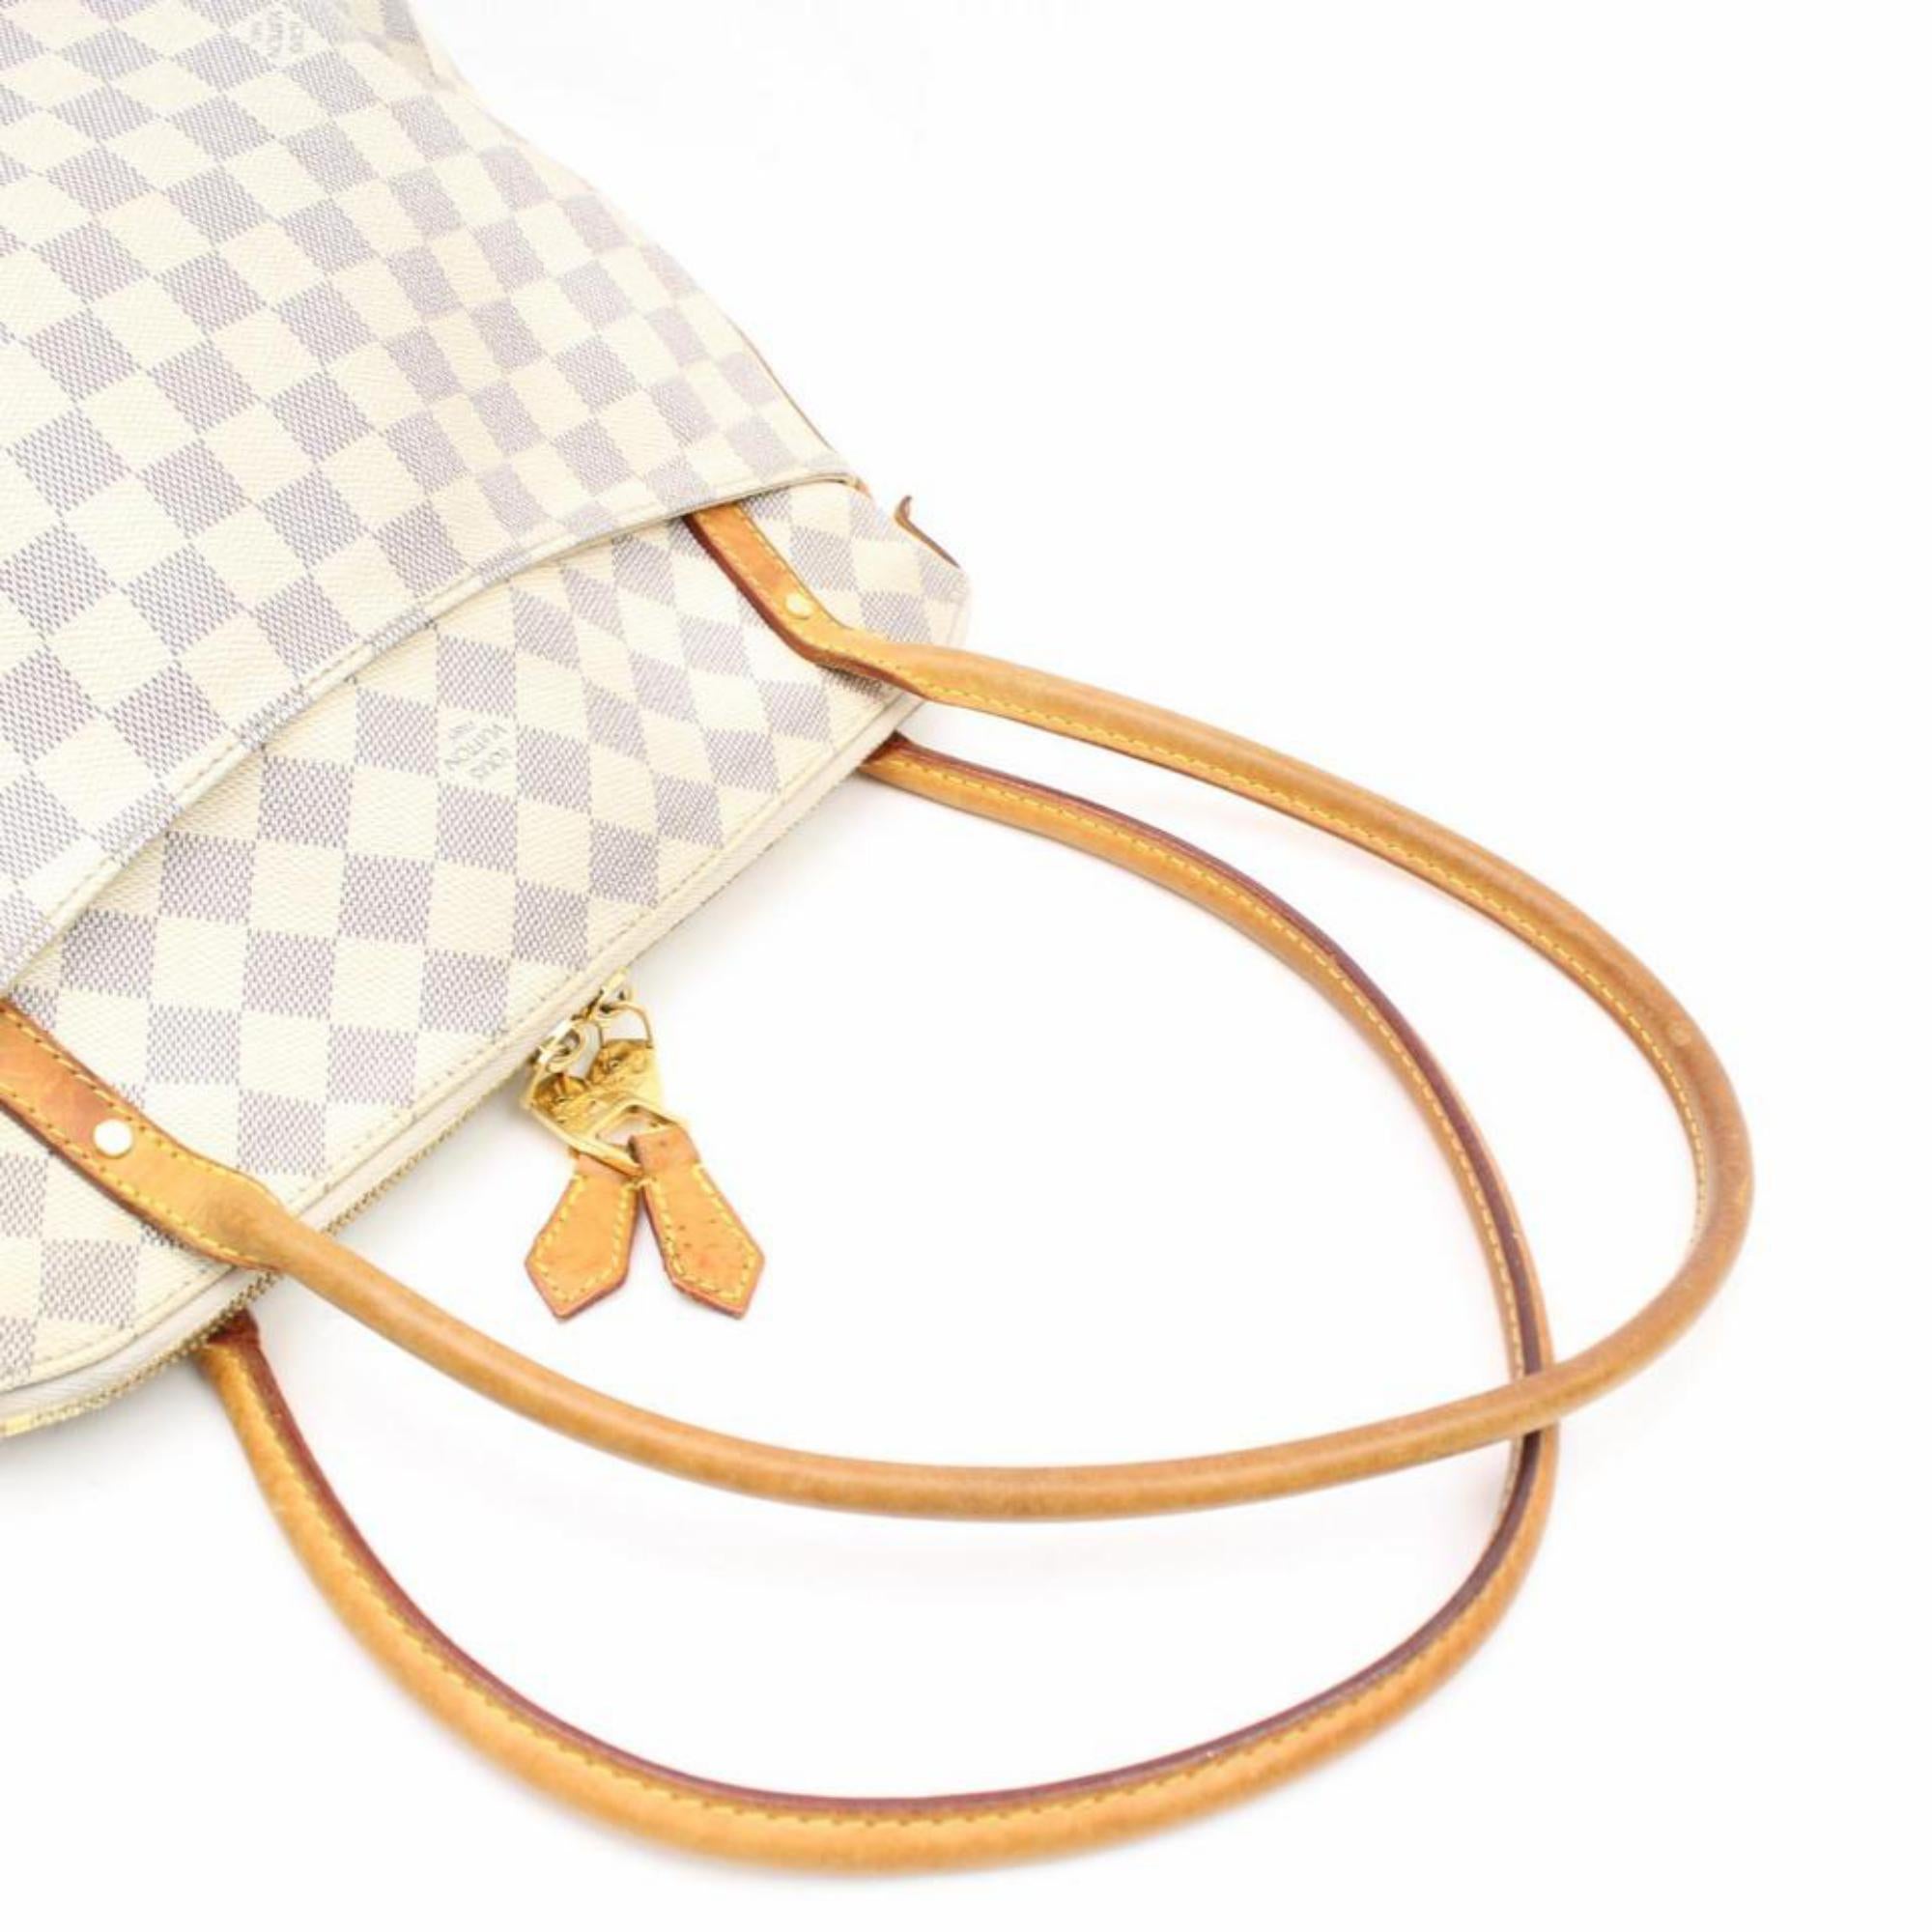 Louis Vuitton Figheri Damier Azur Pm 866456 White Coated Canvas Shoulder Bag In Good Condition For Sale In Forest Hills, NY